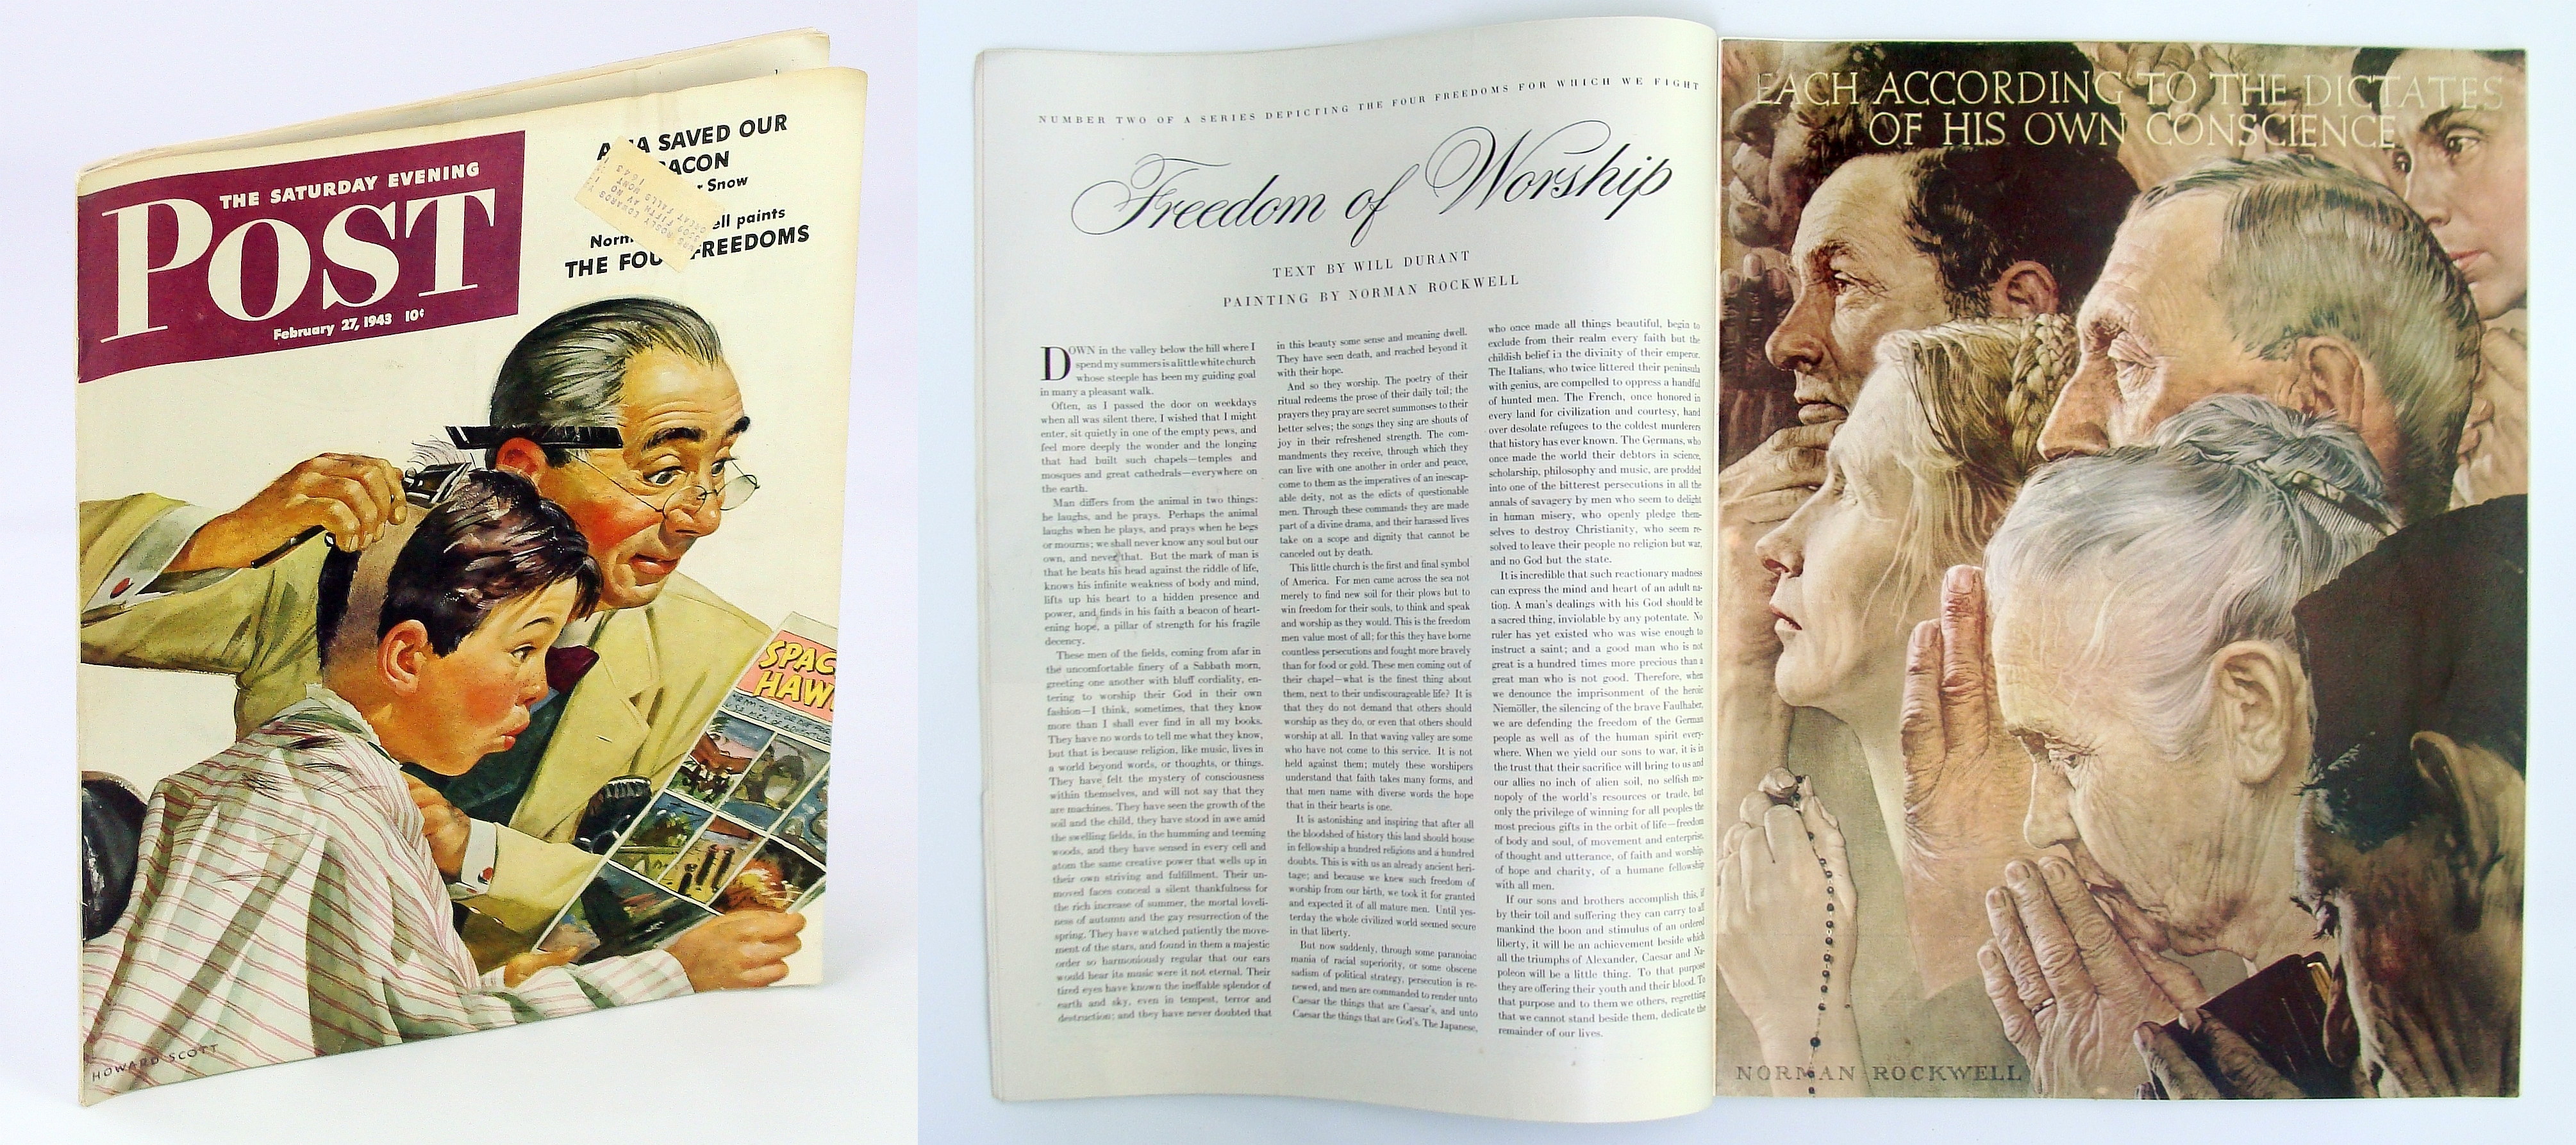 Image for The Saturday Evening Post Magazine, February [Feb.] 27, 1943: Features Norman Rockwell's Classic "Freedom of Worship" Illustration Vol. 215, No. 35